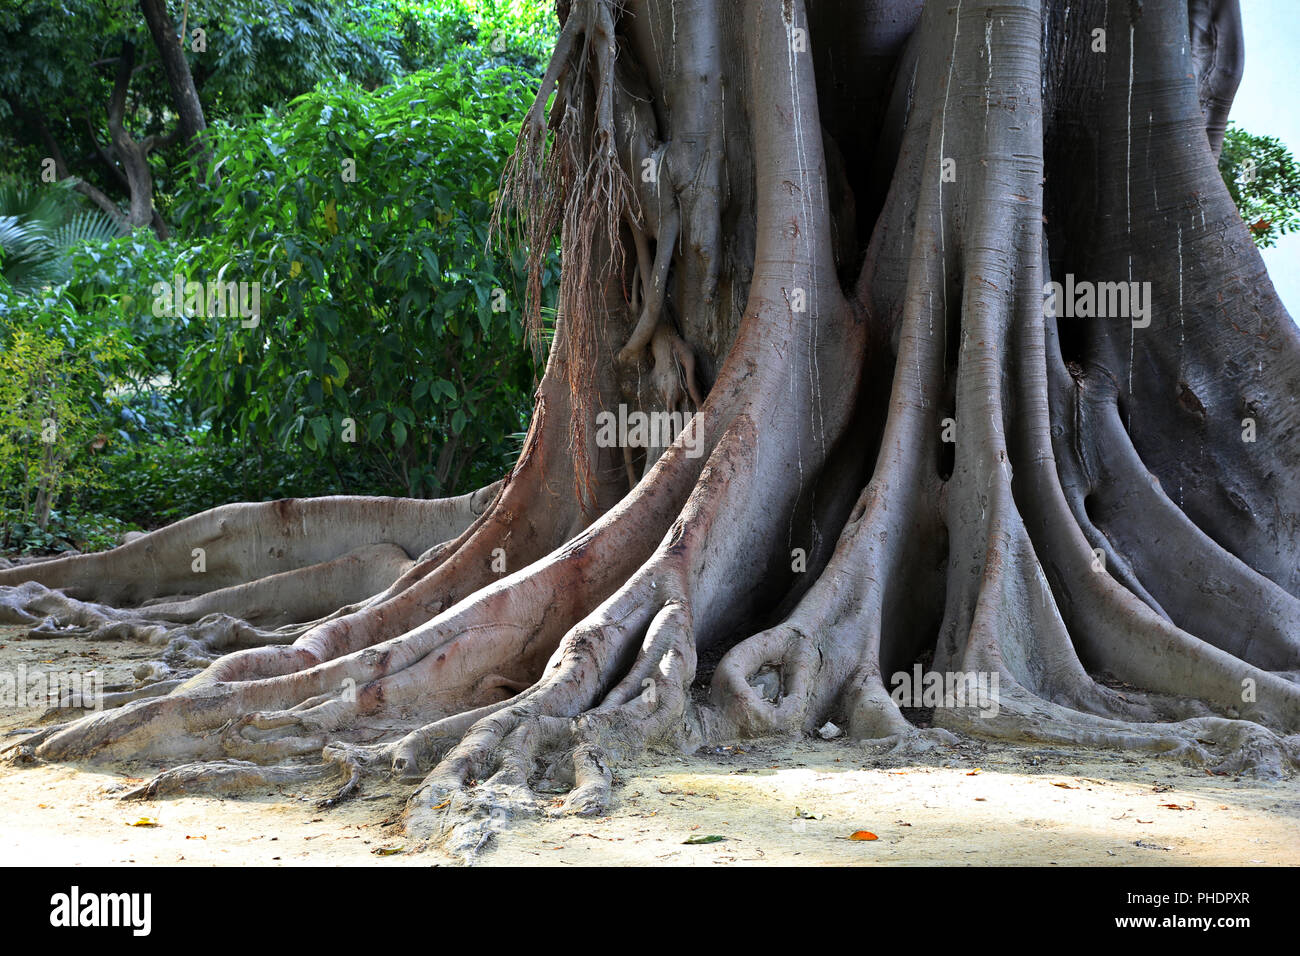 Tribe and roots of Coussapoa dealbata in Maria Luisa Park Stock Photo